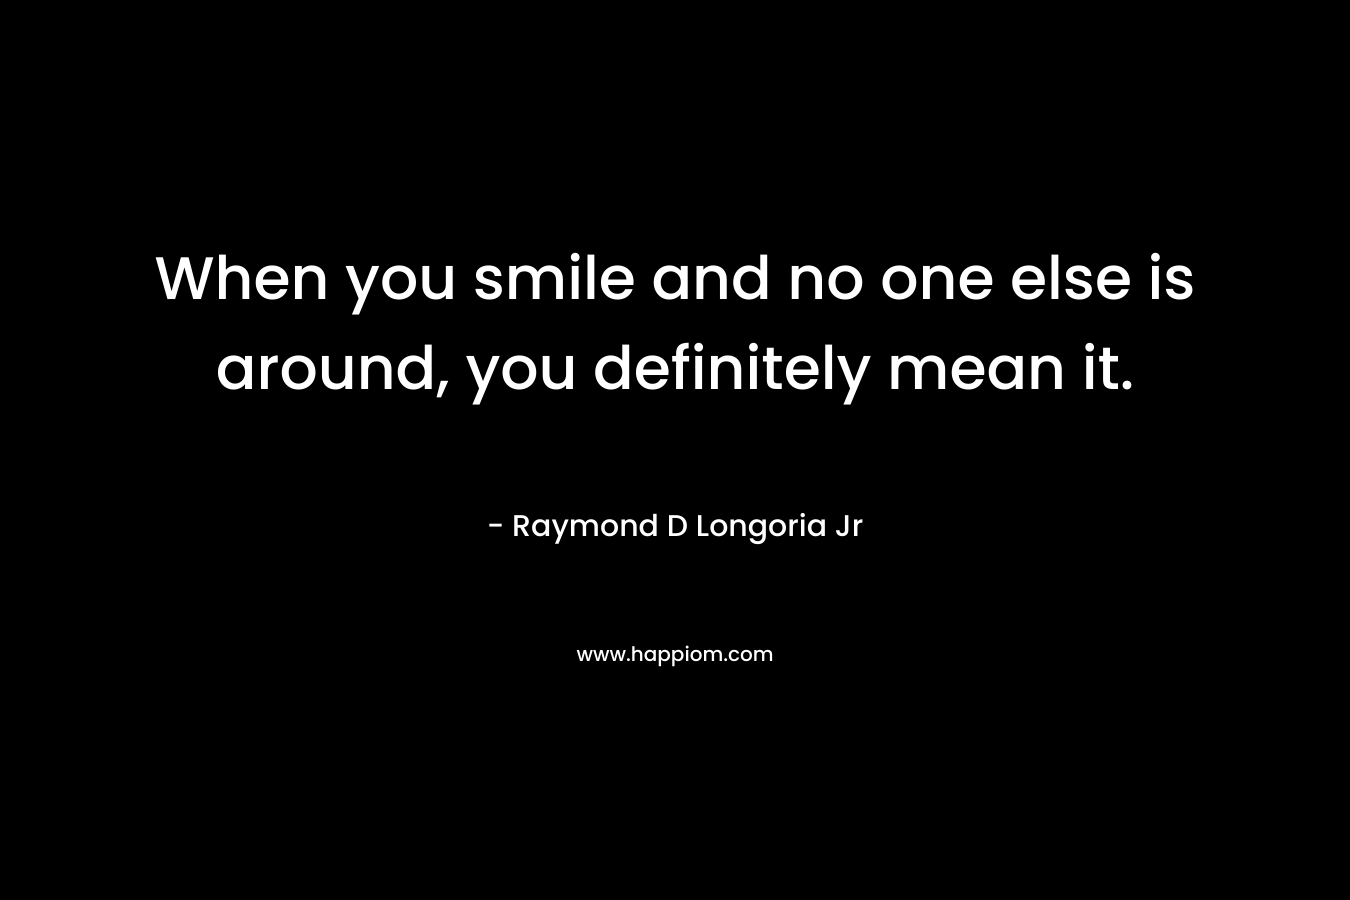 When you smile and no one else is around, you definitely mean it.